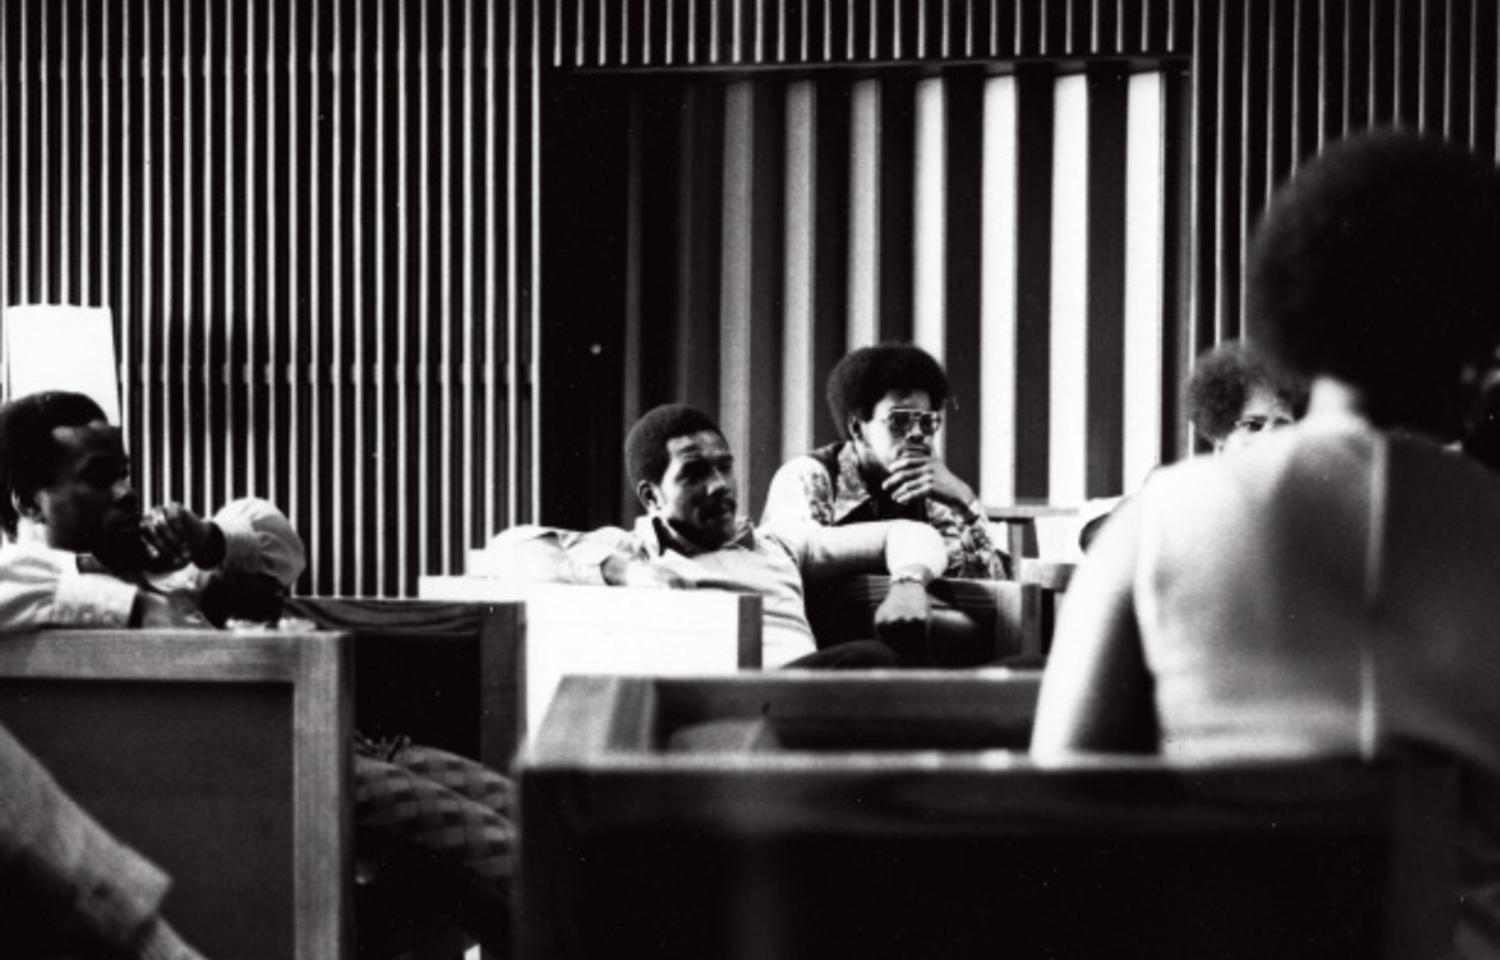 Members of the BSU circa 1970 sit together in chairs